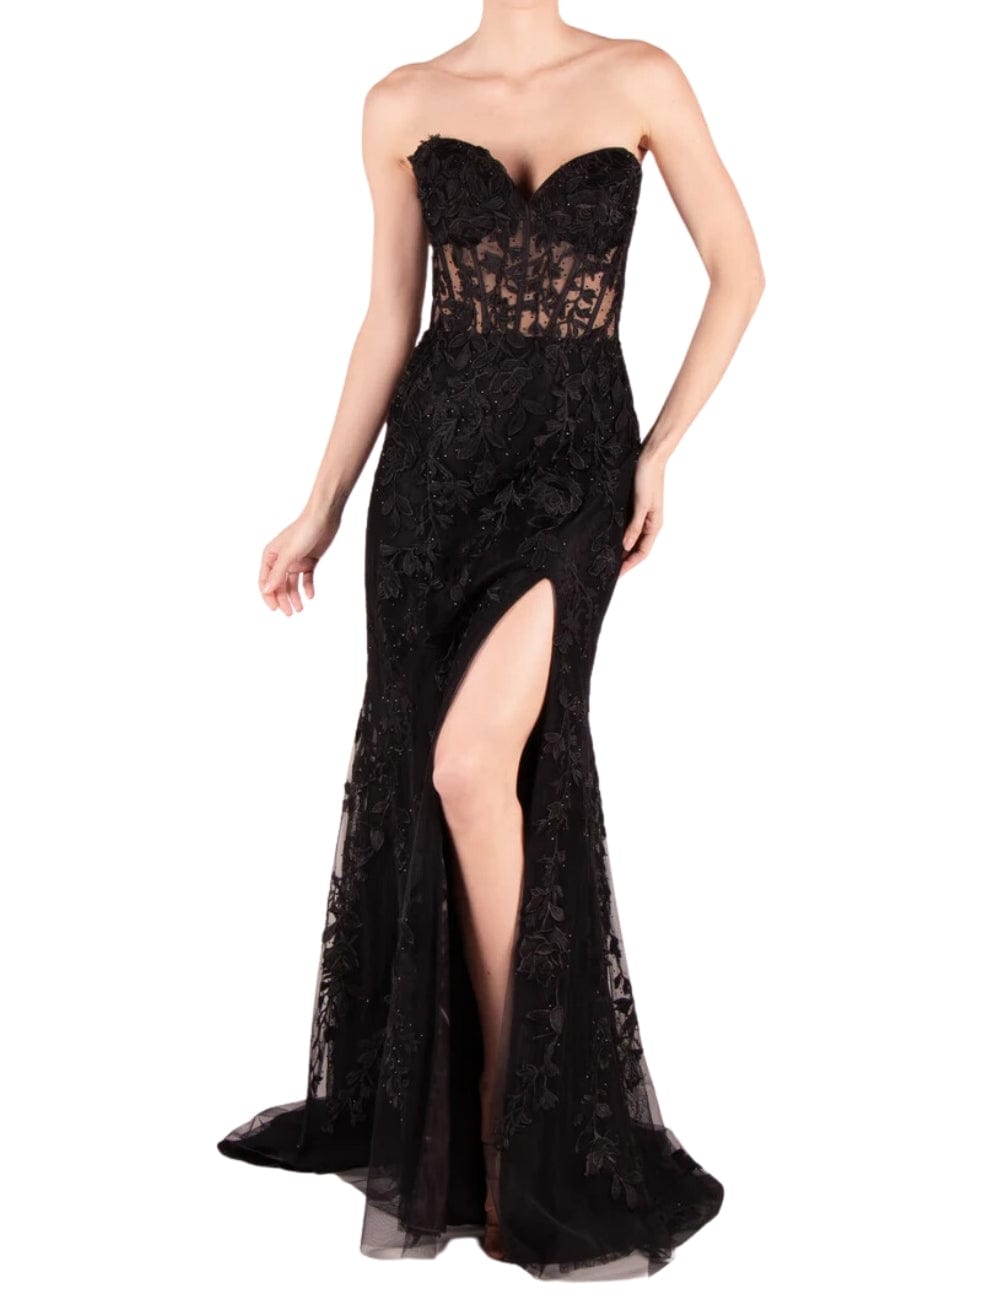 Sherri Hill Full-length Strapless Sweetheart Neckline Black Lace Dress with Corset Bodice and Thigh-High Slit